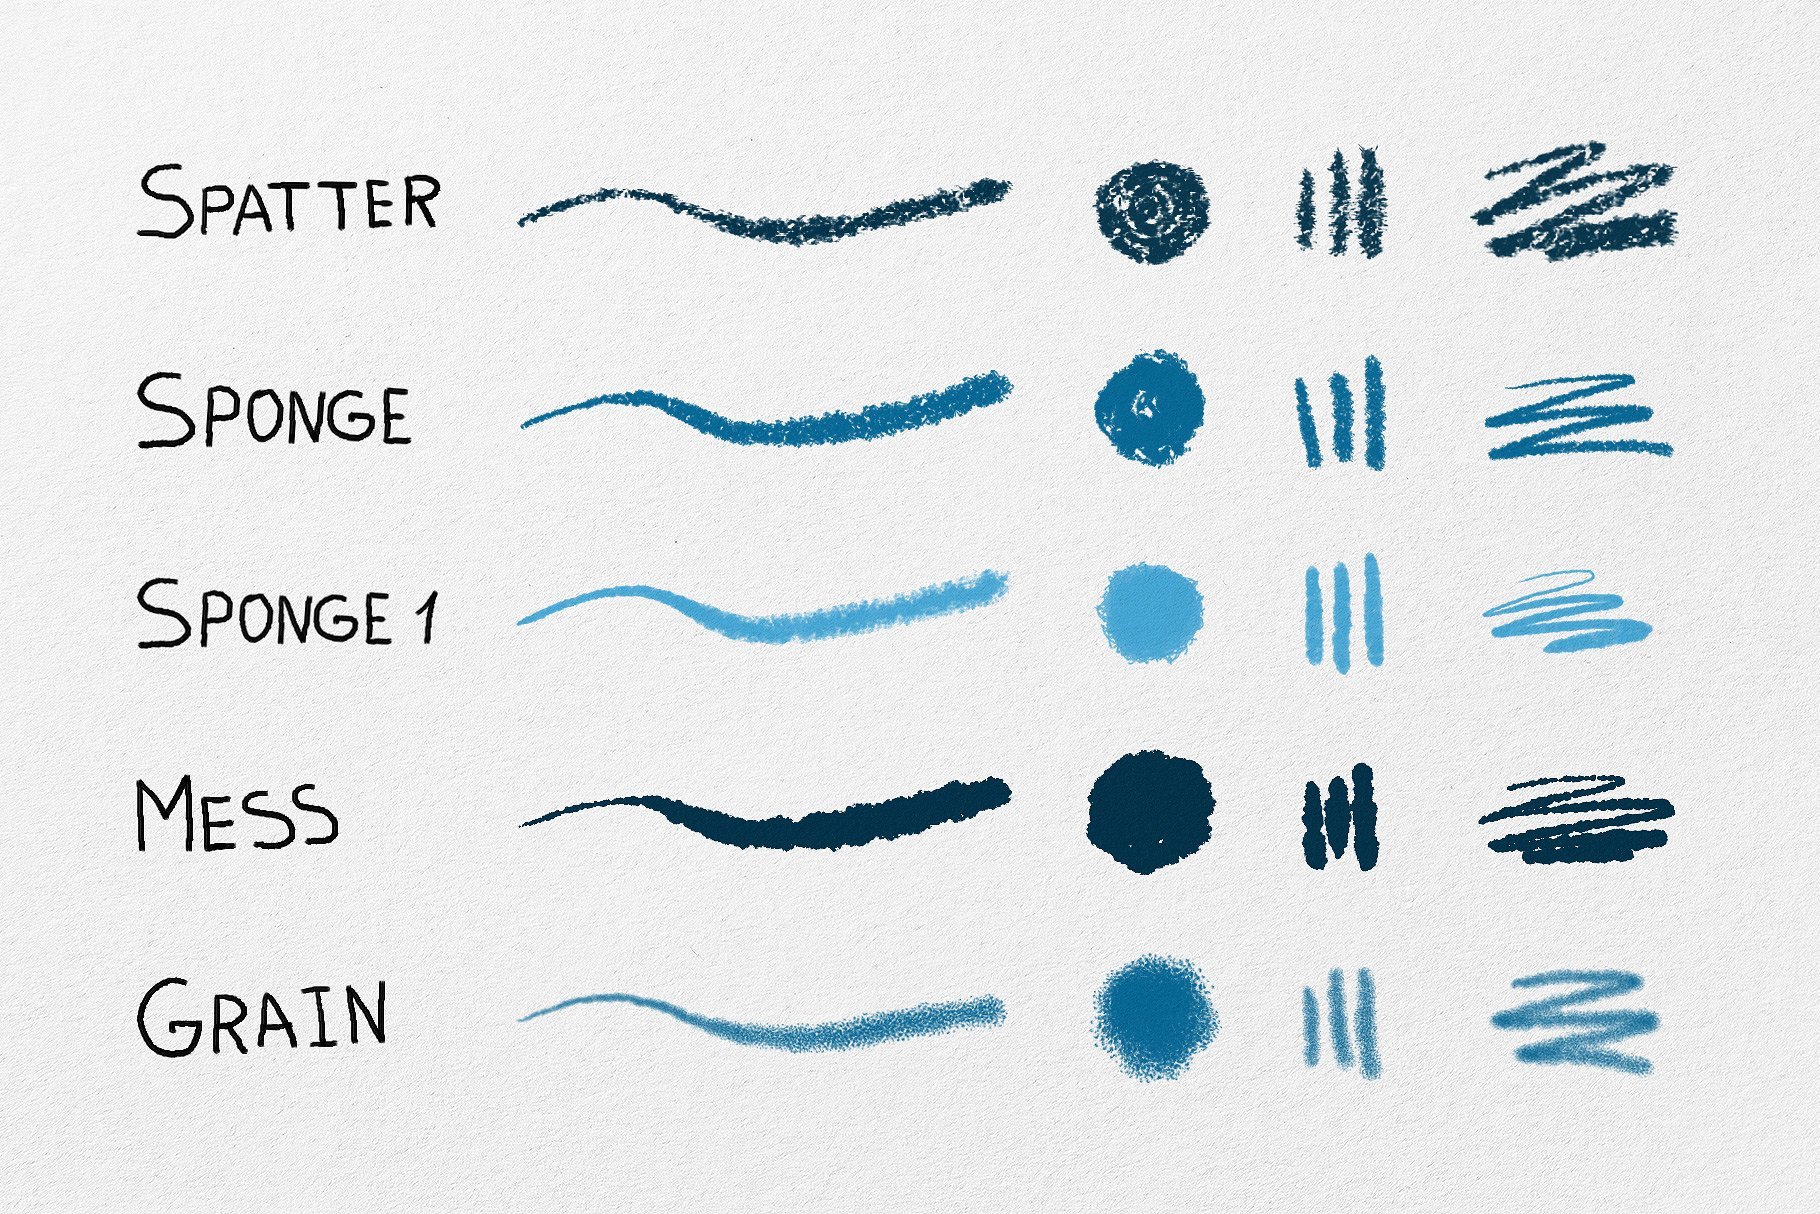 Essential Hand Drawn Brushes